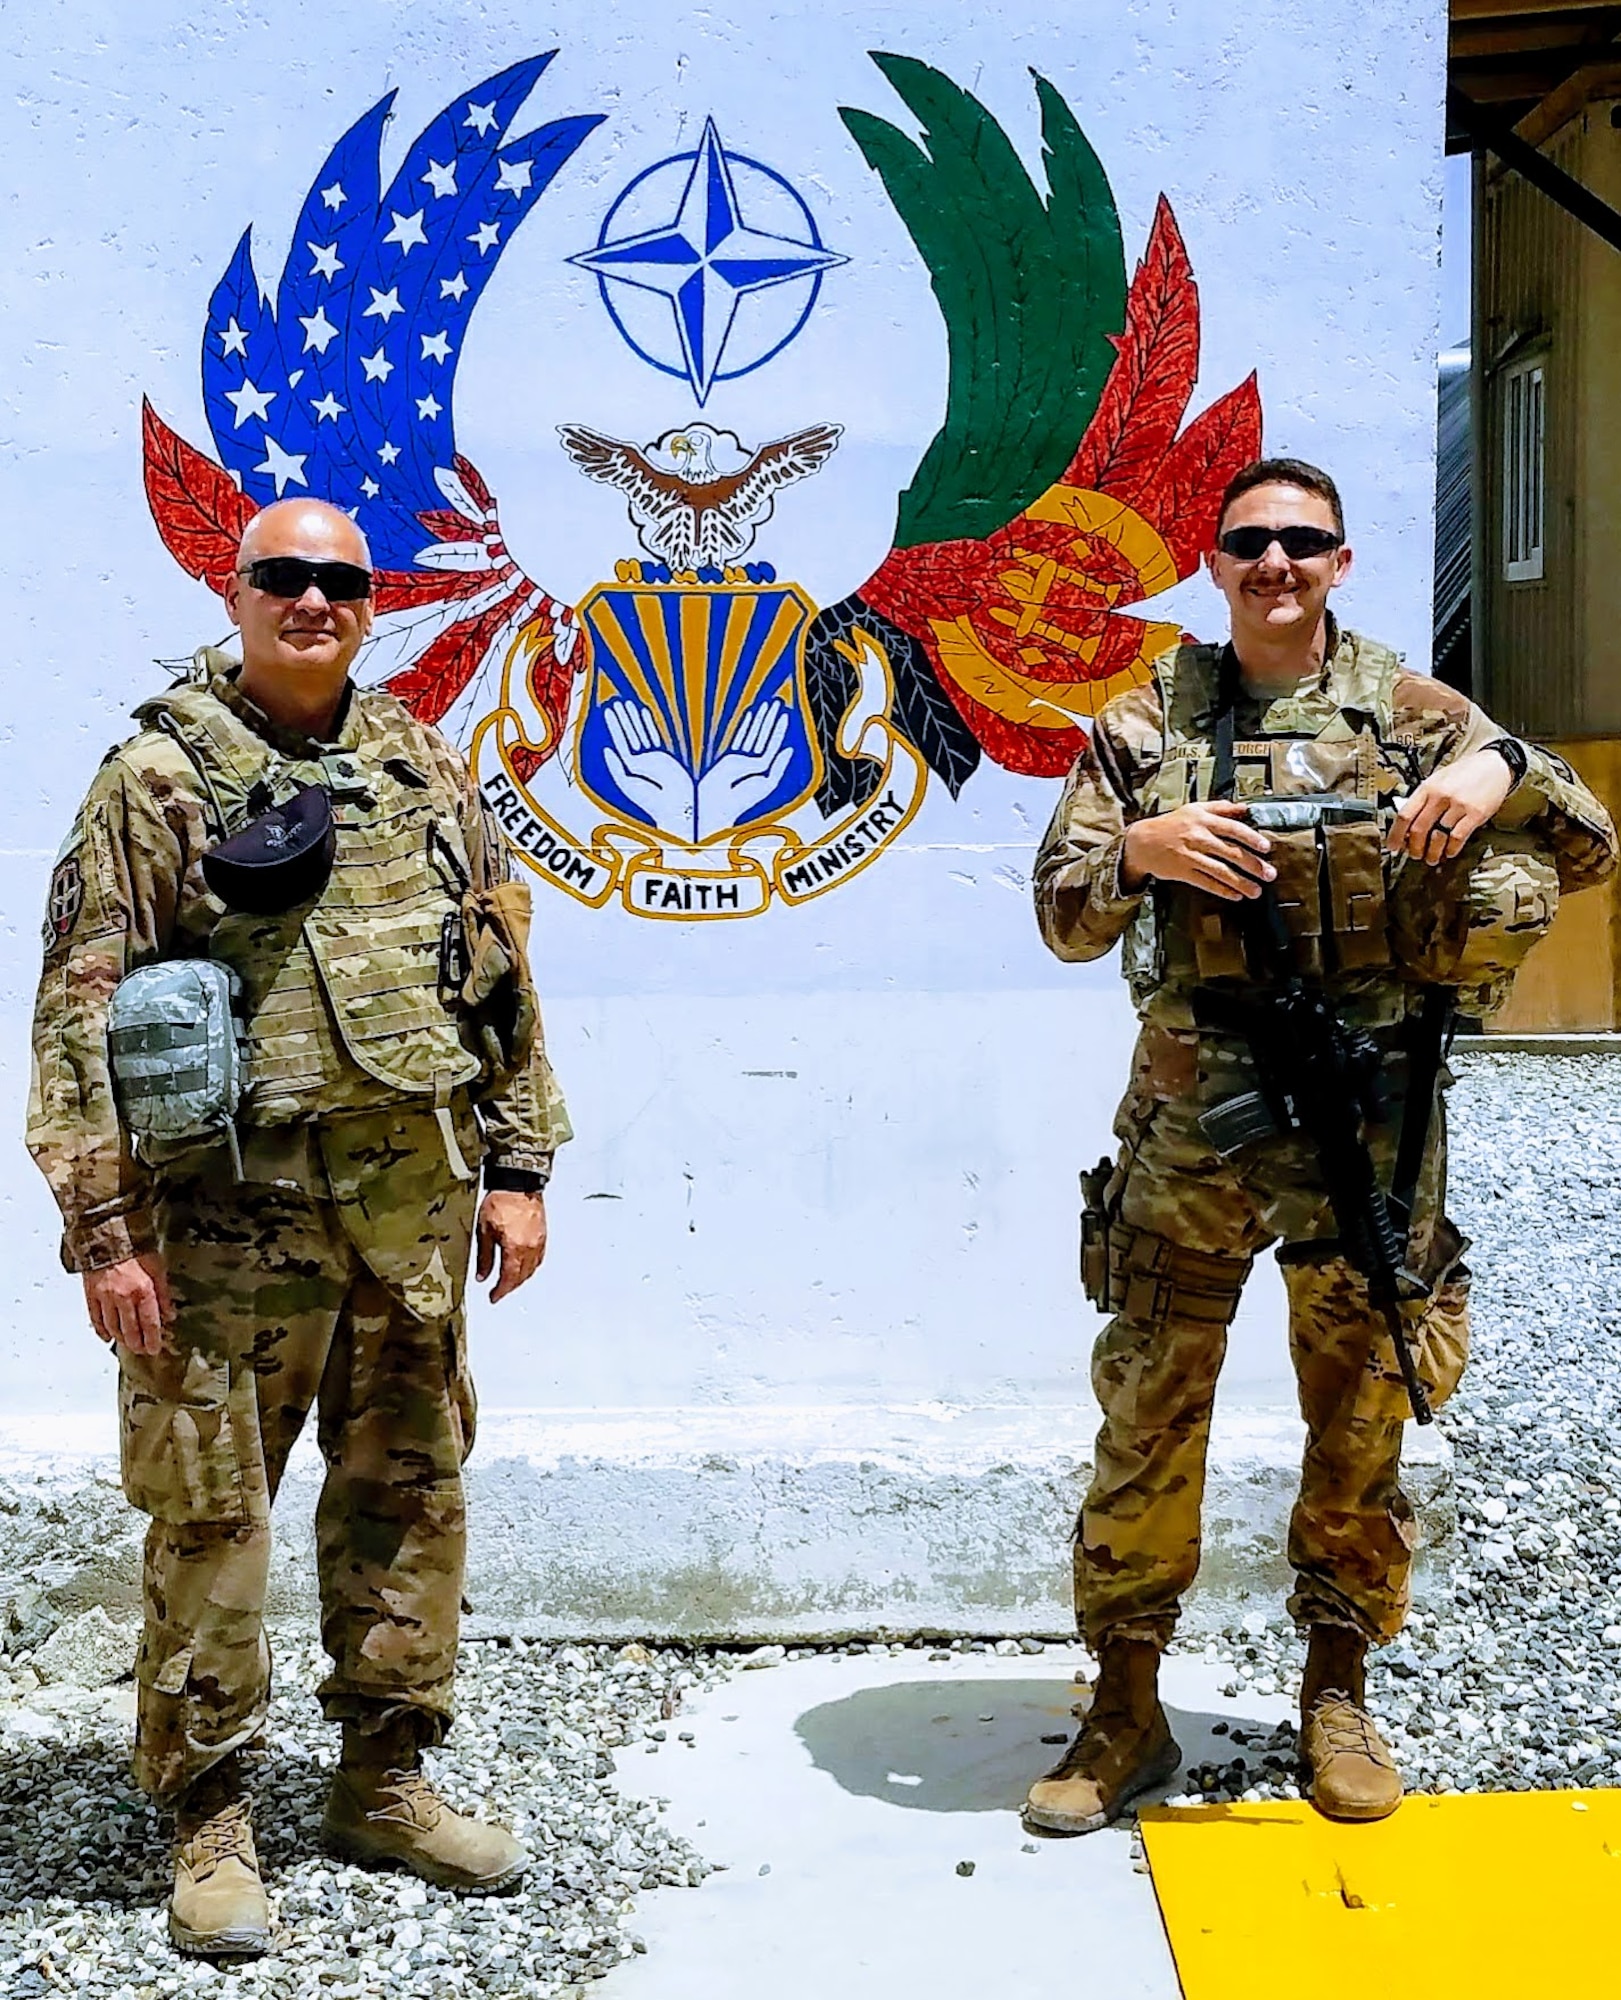 U.S. Air Force Lt. Col. John Shipman, Train, Advise, Assist Command-Air chaplain and Staff Sgt. Tony Hanks, 307th Bomb Wing religious affairs specialist stand by a mural at Hamid Karzai International Airport in Kabul, Afghanistan, July 12, 2018. Hanks was responsible for the safety of Shipman during their deployment. Chaplains are non-combatants and do not carry weapons.  (Courtesy photo)